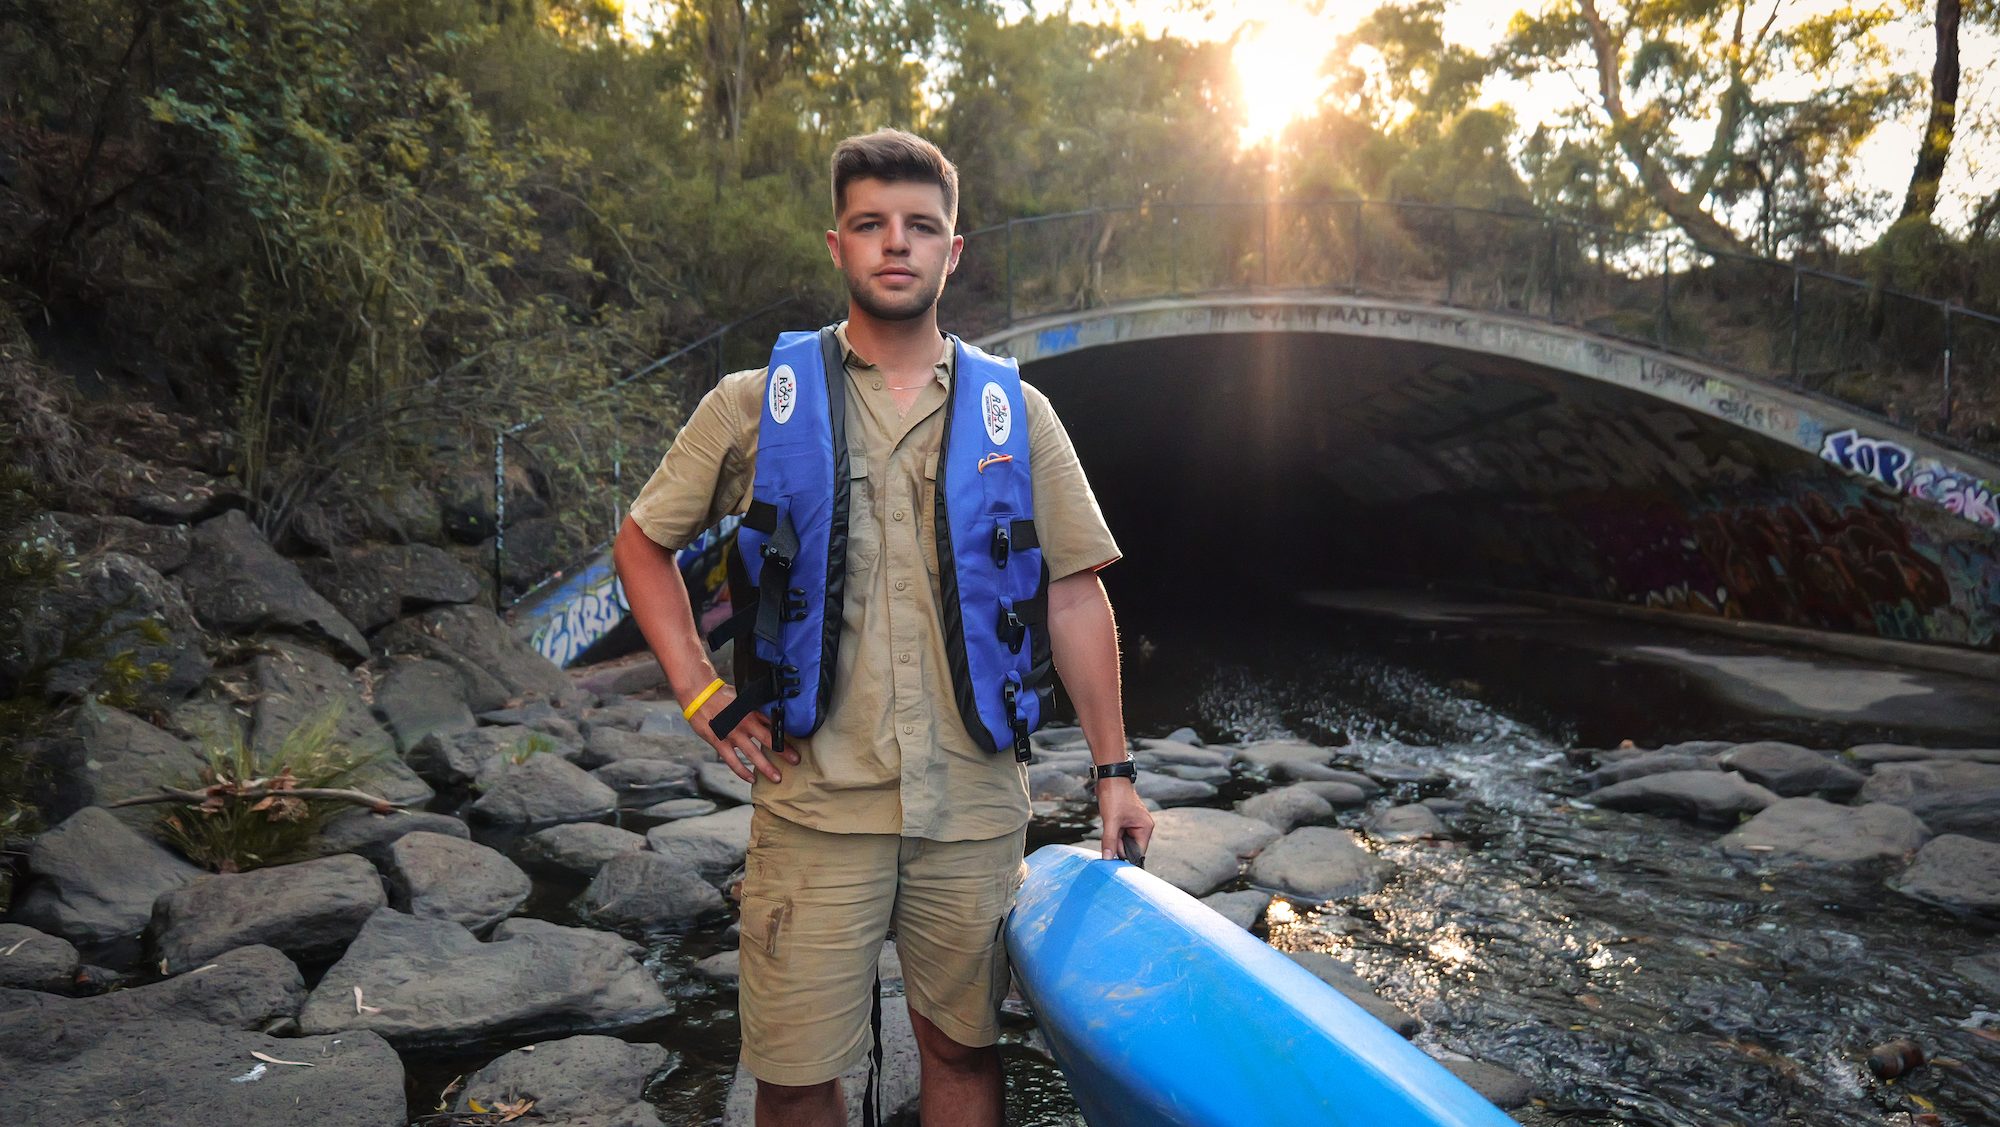 man standing in front of a storm drain holding a kayak